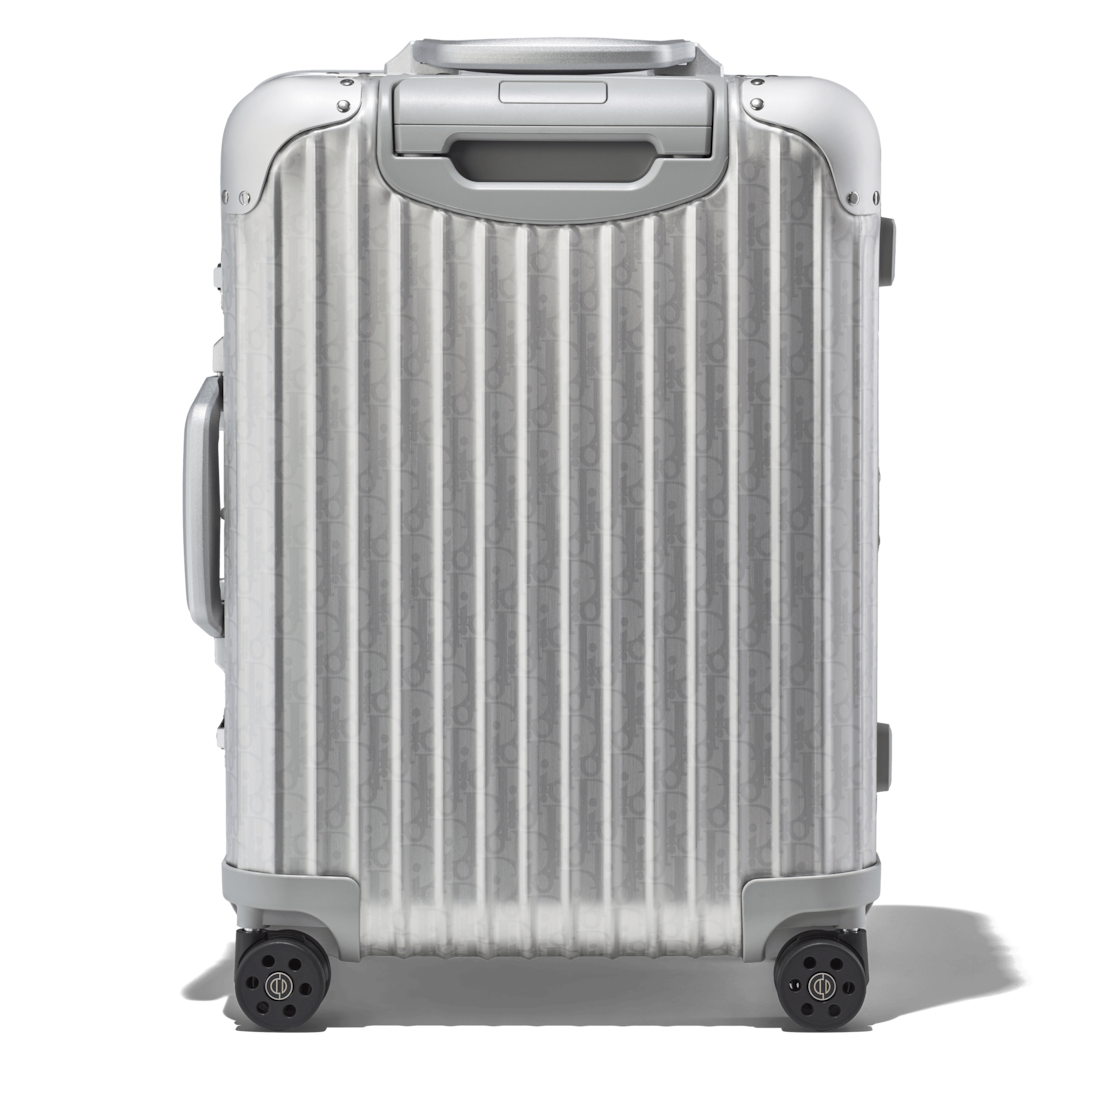 DIOR and RIMOWA Cabin Suitcase in 